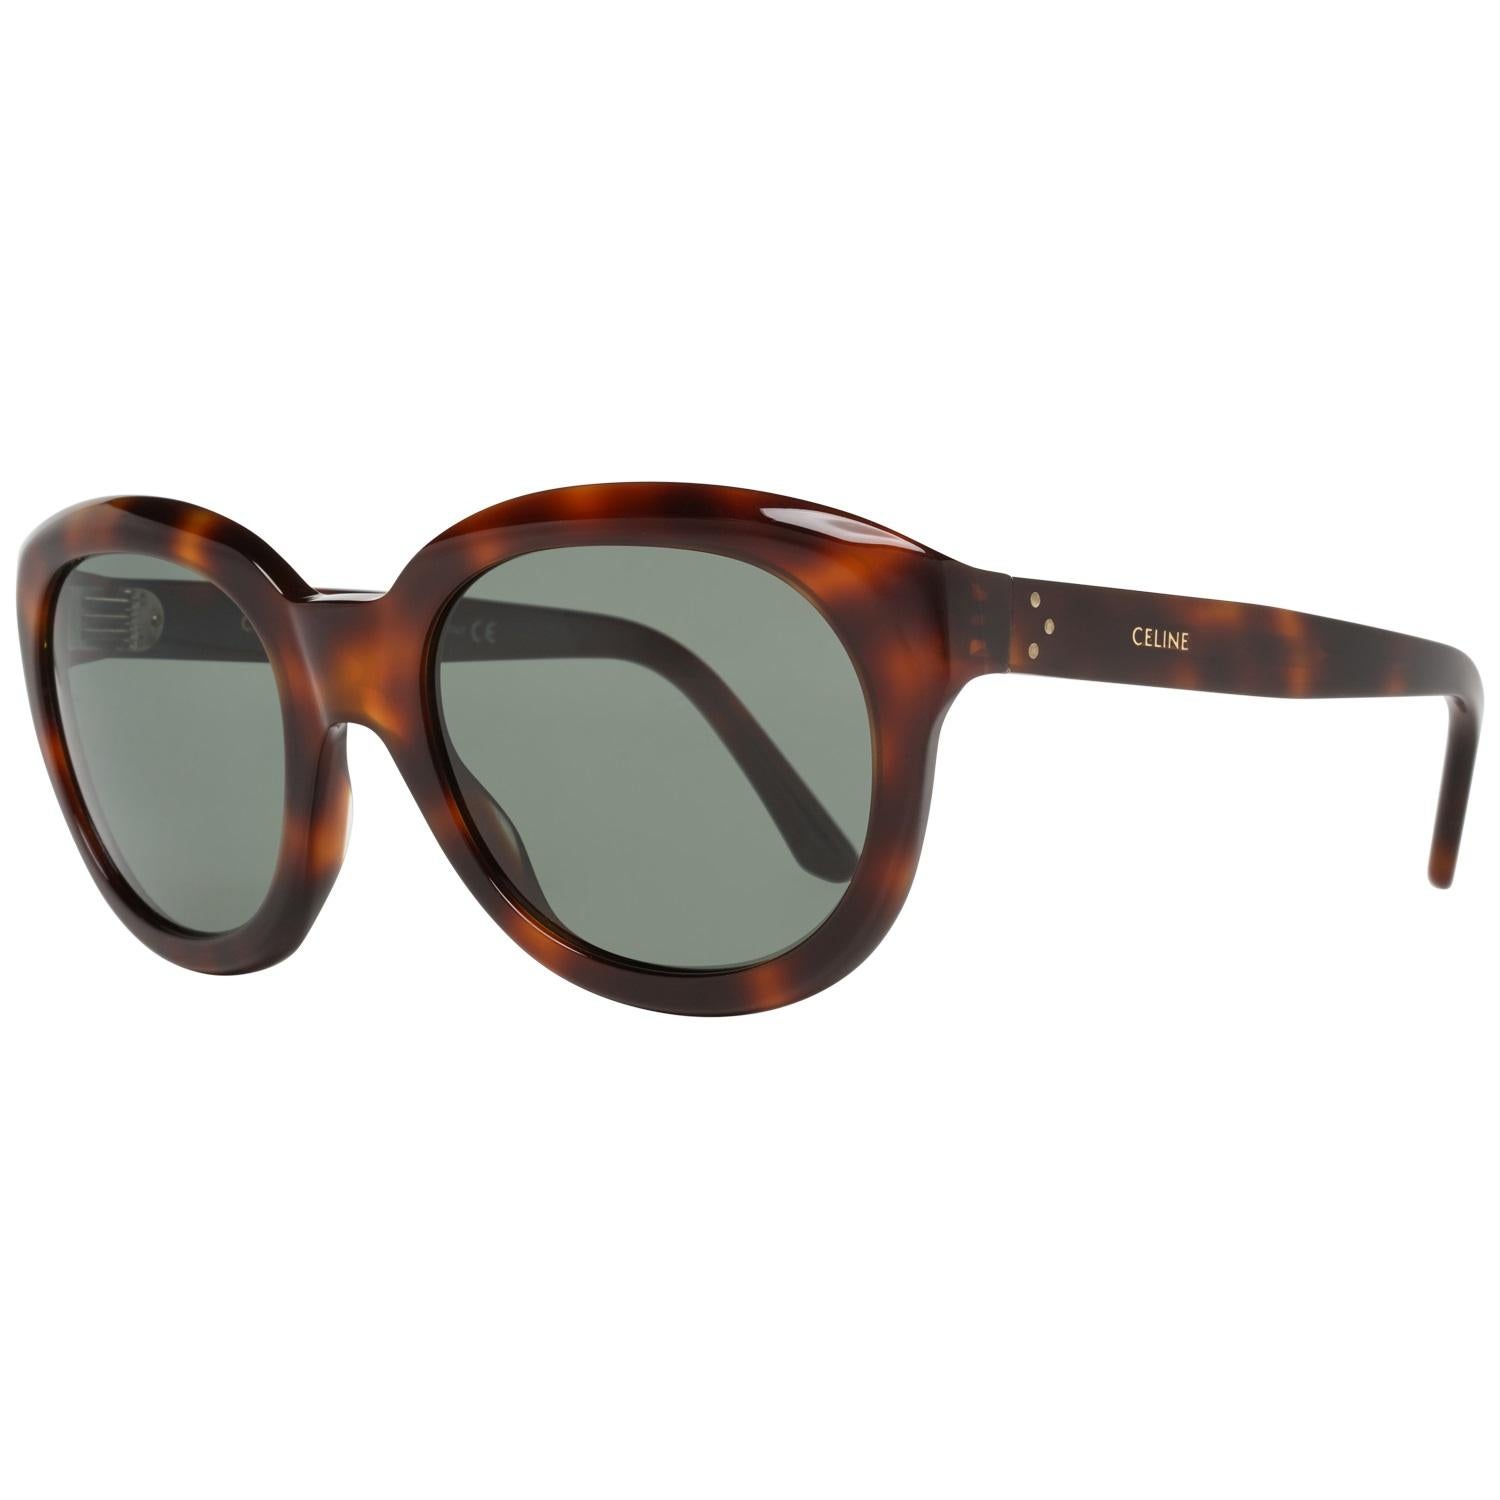 Details

MATERIAL: Acetate

COLOR: Brown

MODEL: CL40071I 5656N

GENDER: Women

COUNTRY OF MANUFACTURE: Italy

TYPE: Sunglasses

ORIGINAL CASE?: Yes

STYLE: Oval

OCCASION: Casual

FEATURES: Lightweight

LENS COLOR: Grey

LENS TECHNOLOGY: No